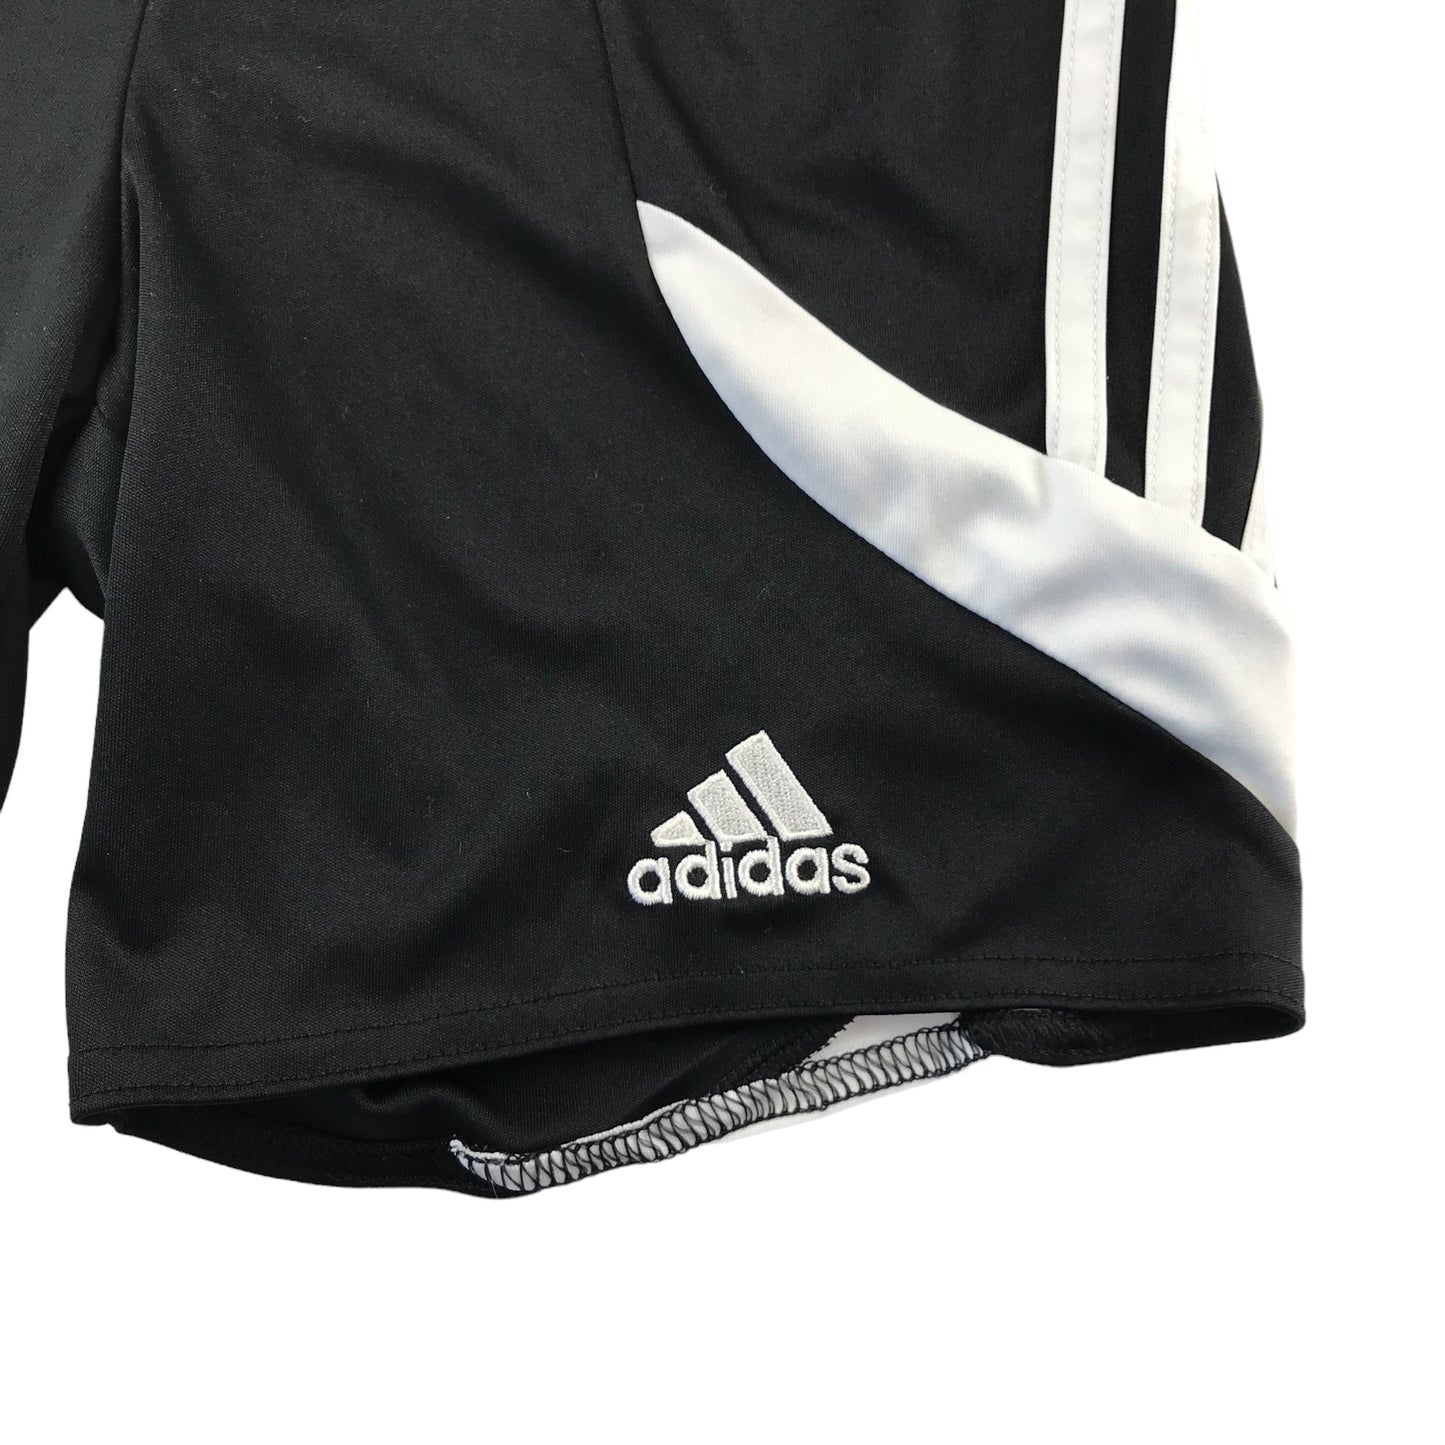 Adidas Sport Shorts Age 7-8 Black and white Football Style